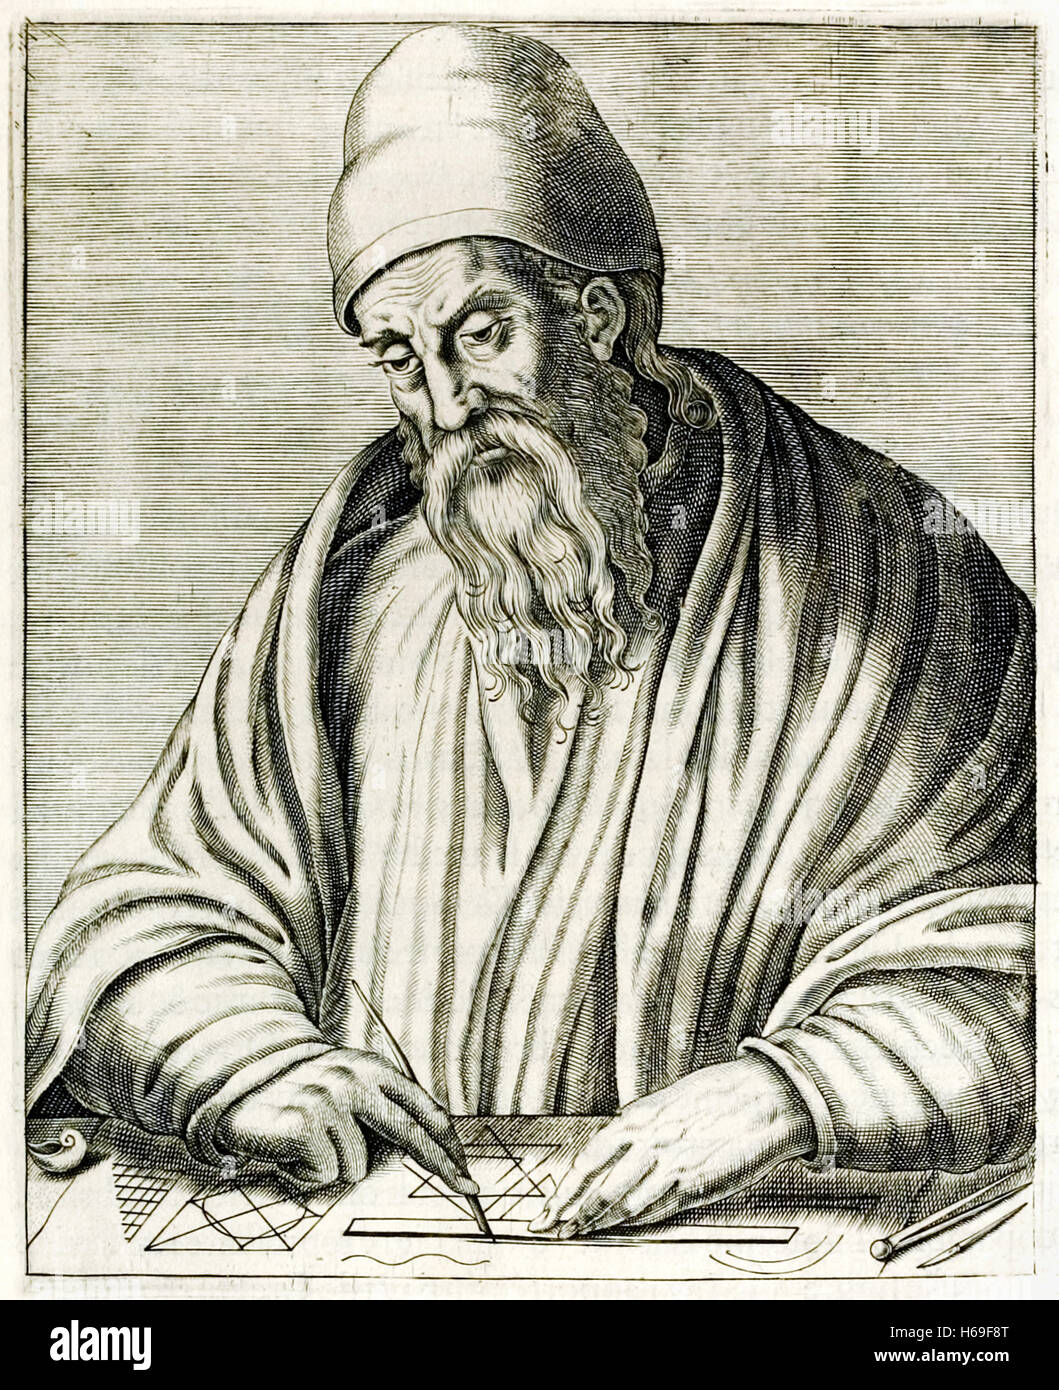 Euclid of Alexandria (450-350BC) Greek mathematician who wrote 'Elements' one of the most influential works in the history of mathematics. Engraving by Frère André Thévet (1516-1590) published in 1584. See description for more information. Stock Photo